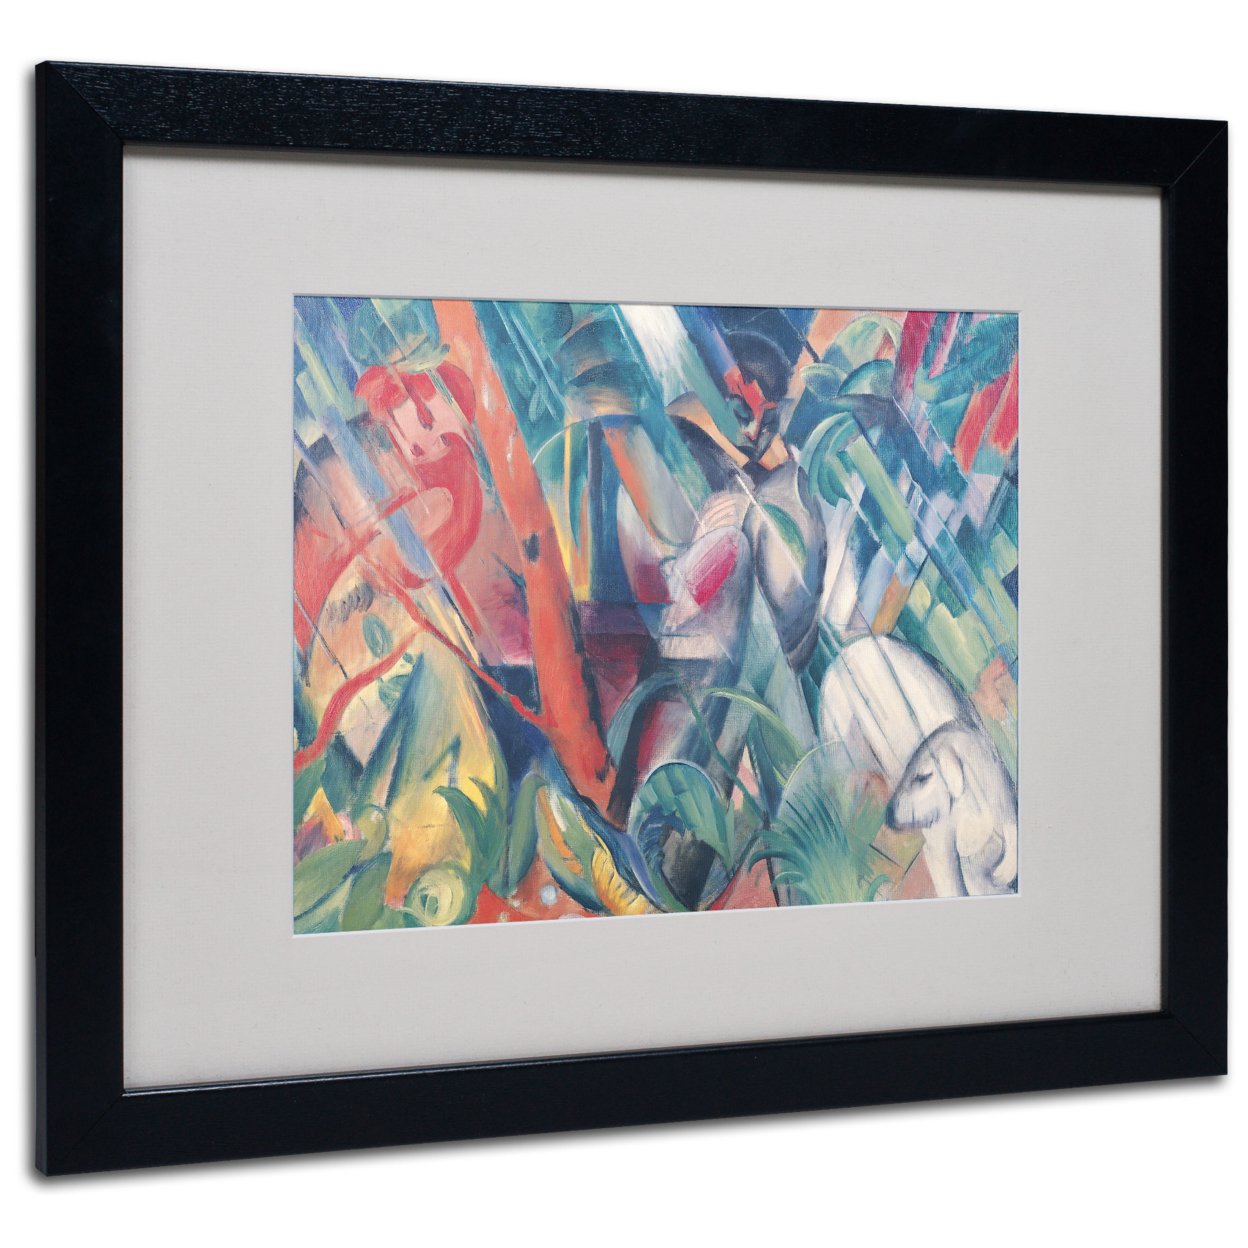 Franz Marc 'In The Rain 1912' Black Wooden Framed Art 18 X 22 Inches